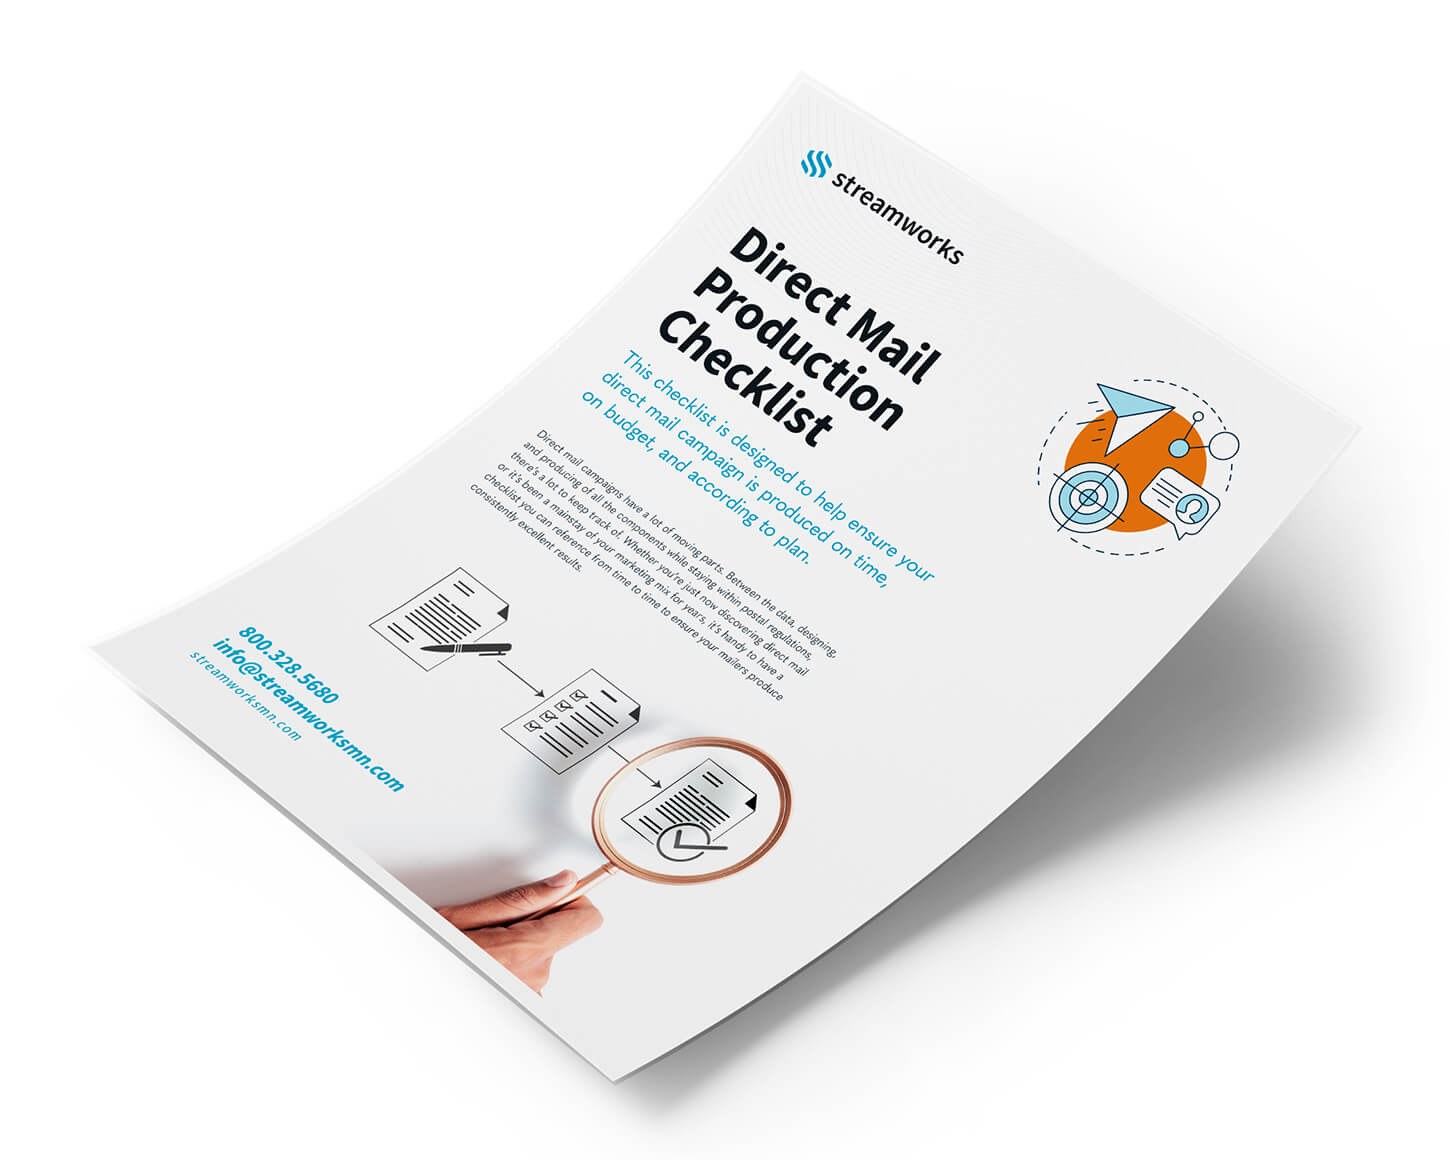 Direct Mail Production Checklist ebook